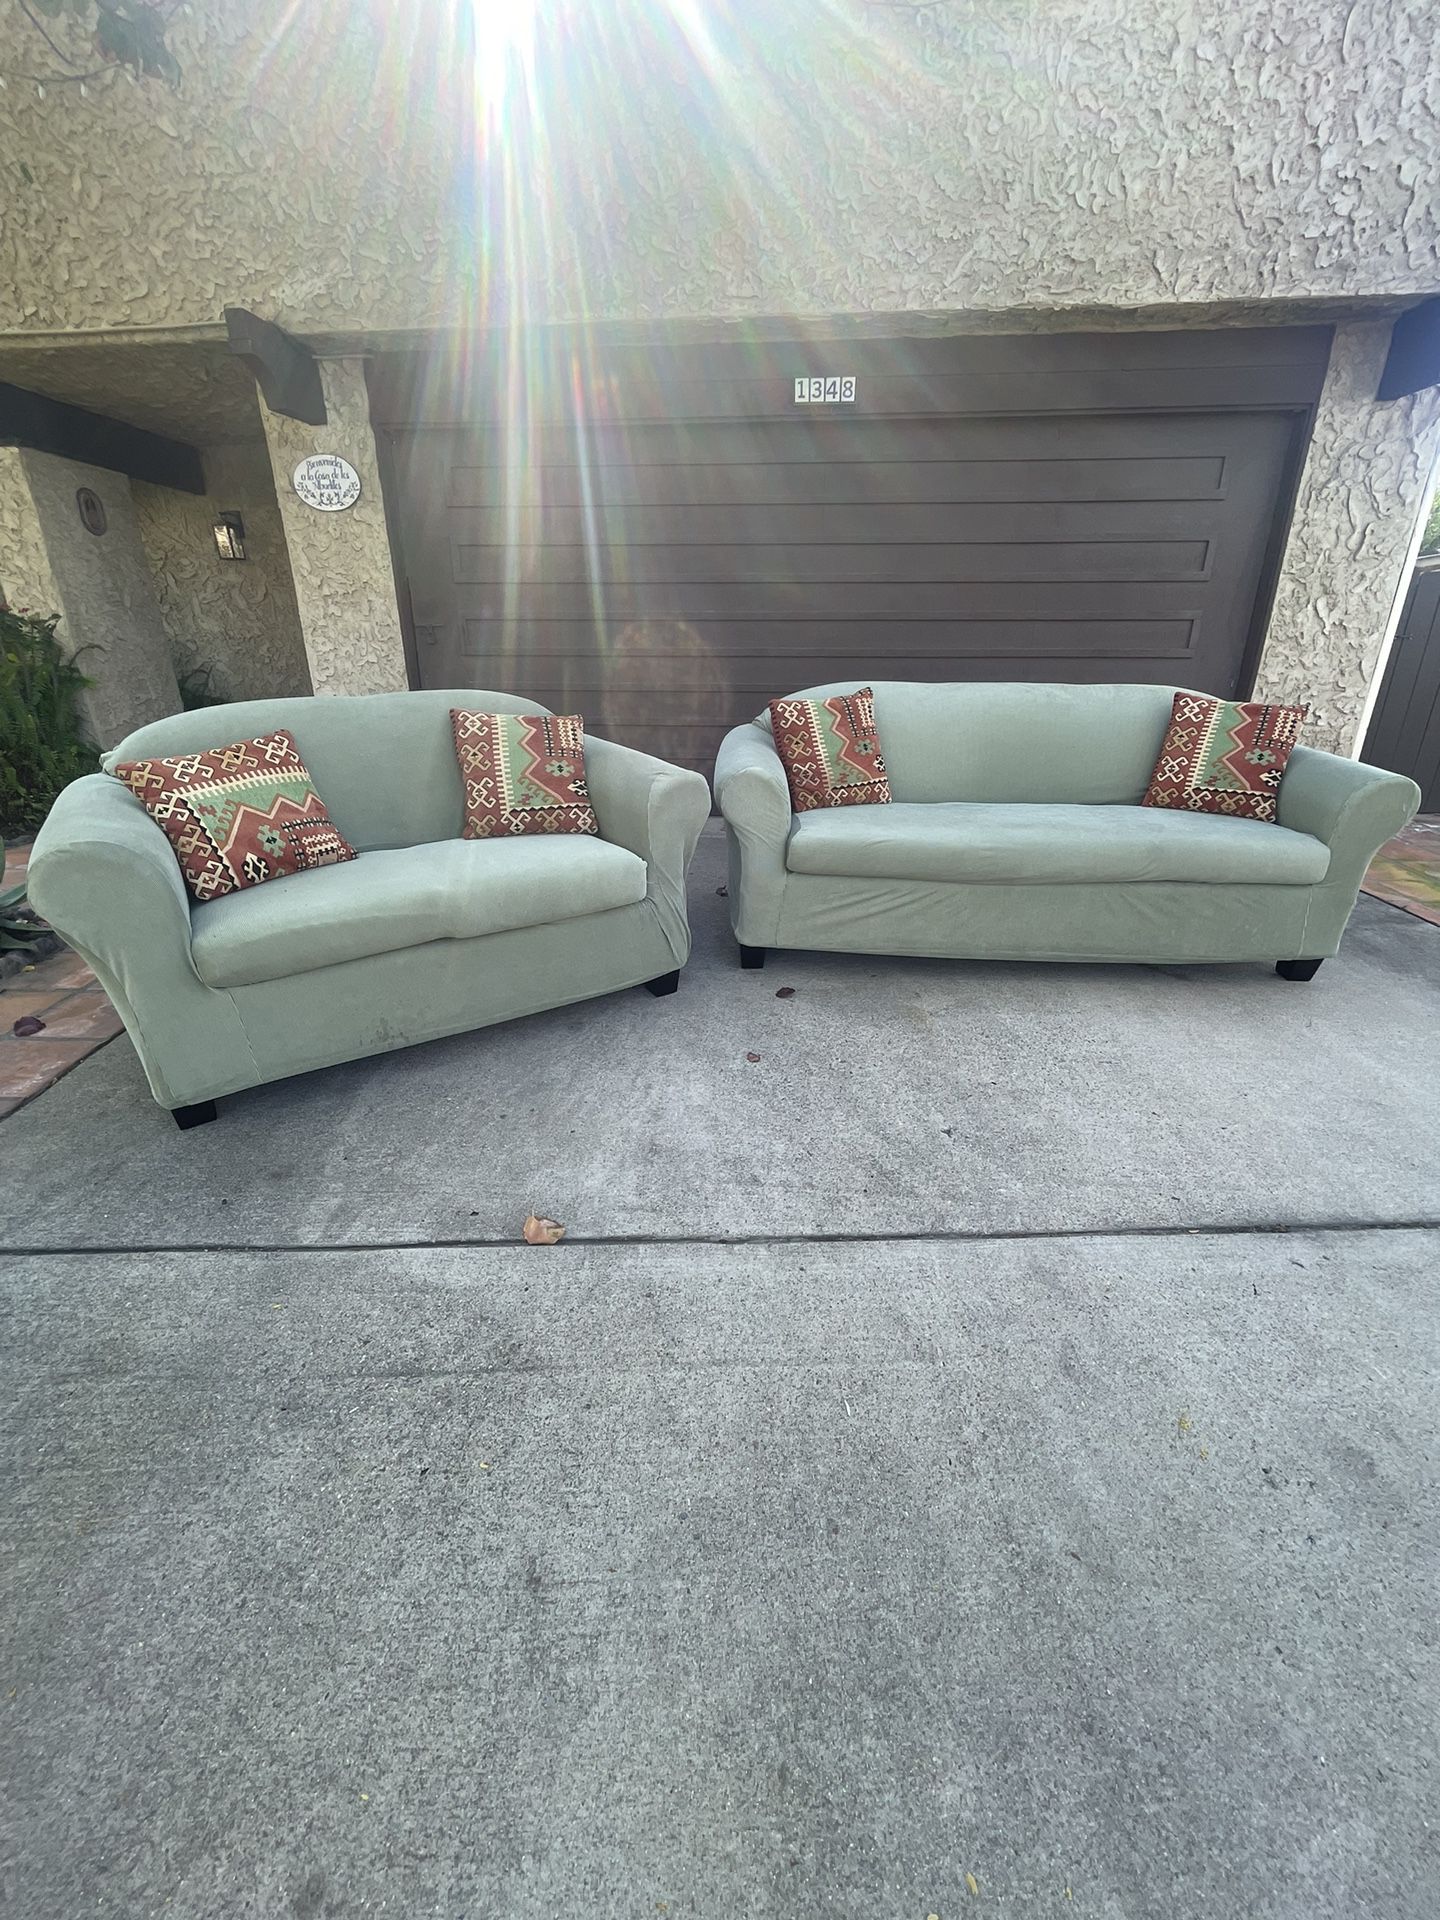 Couch/Sofa Set